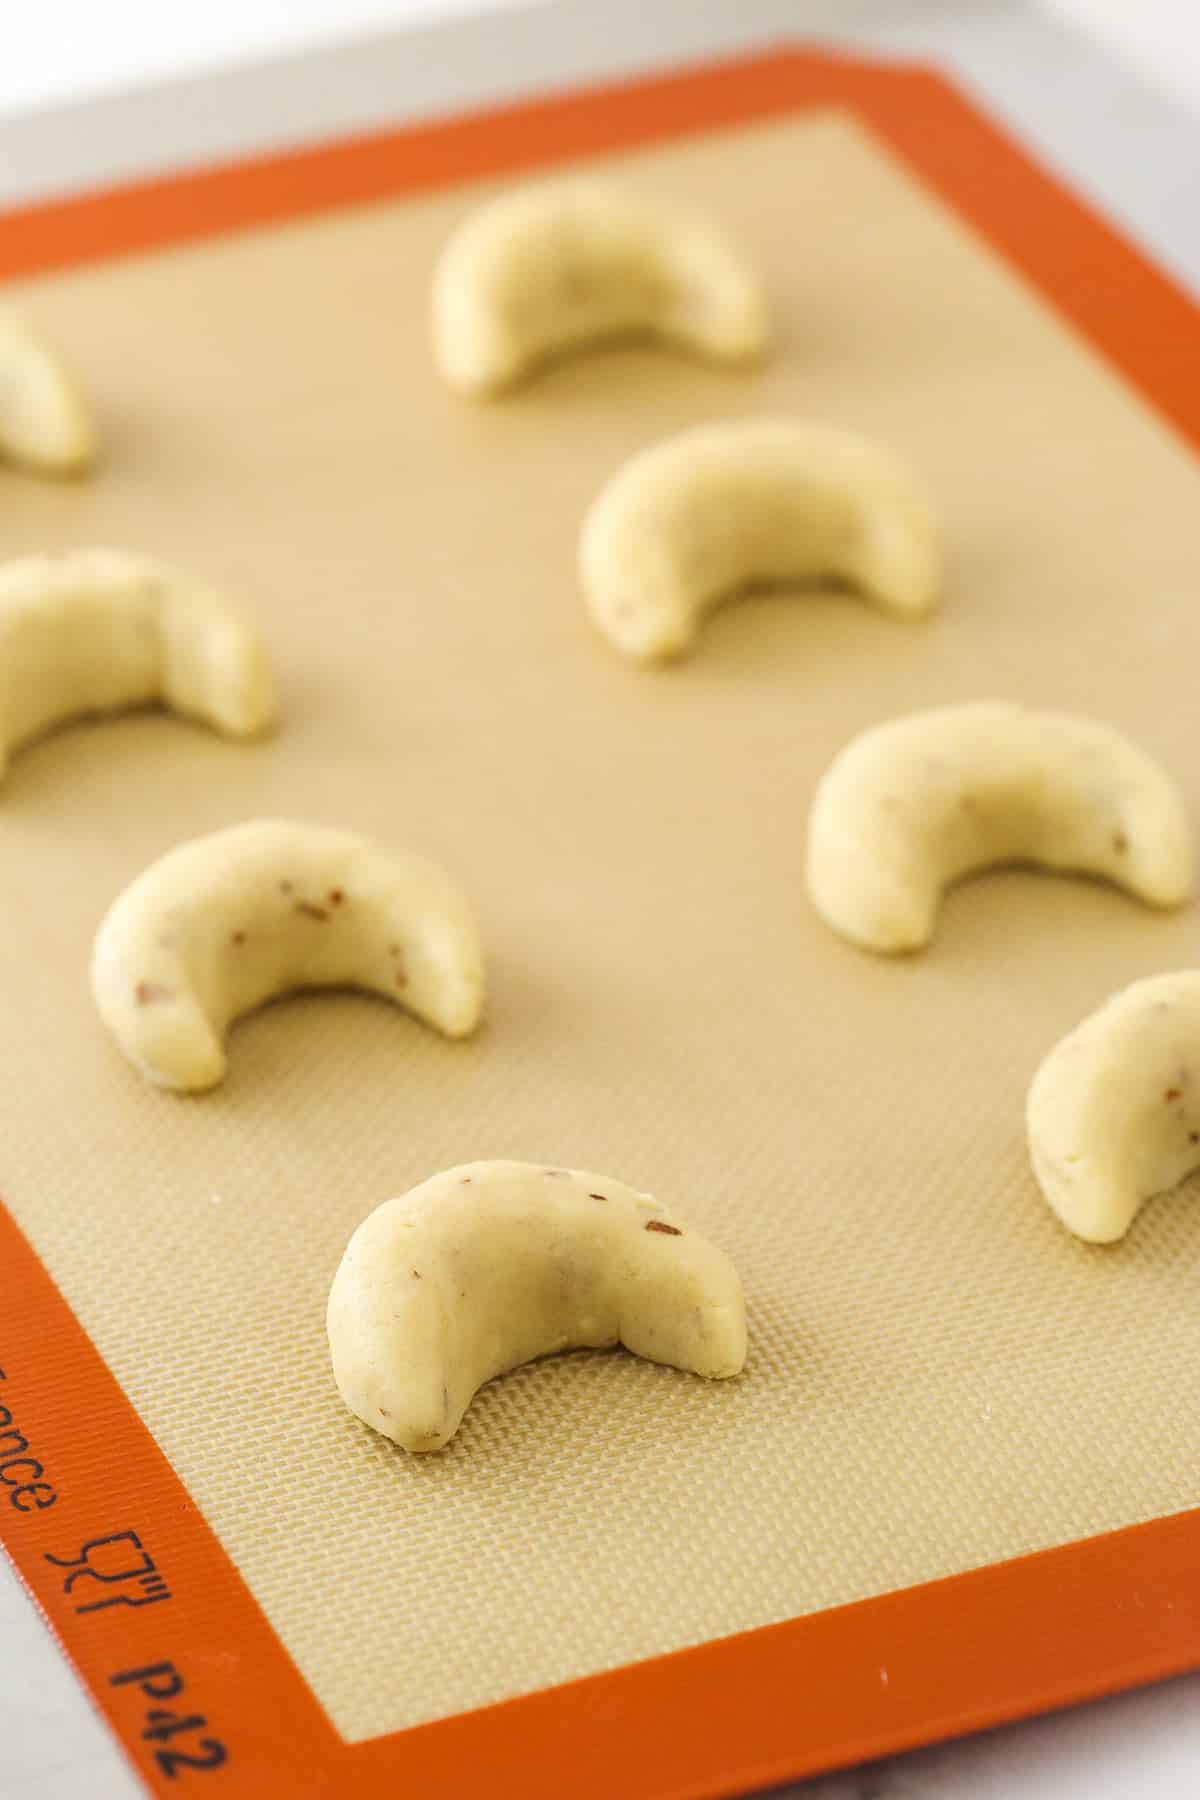 Shaping cookie dough into crescent shapes on a silicone baking mat.